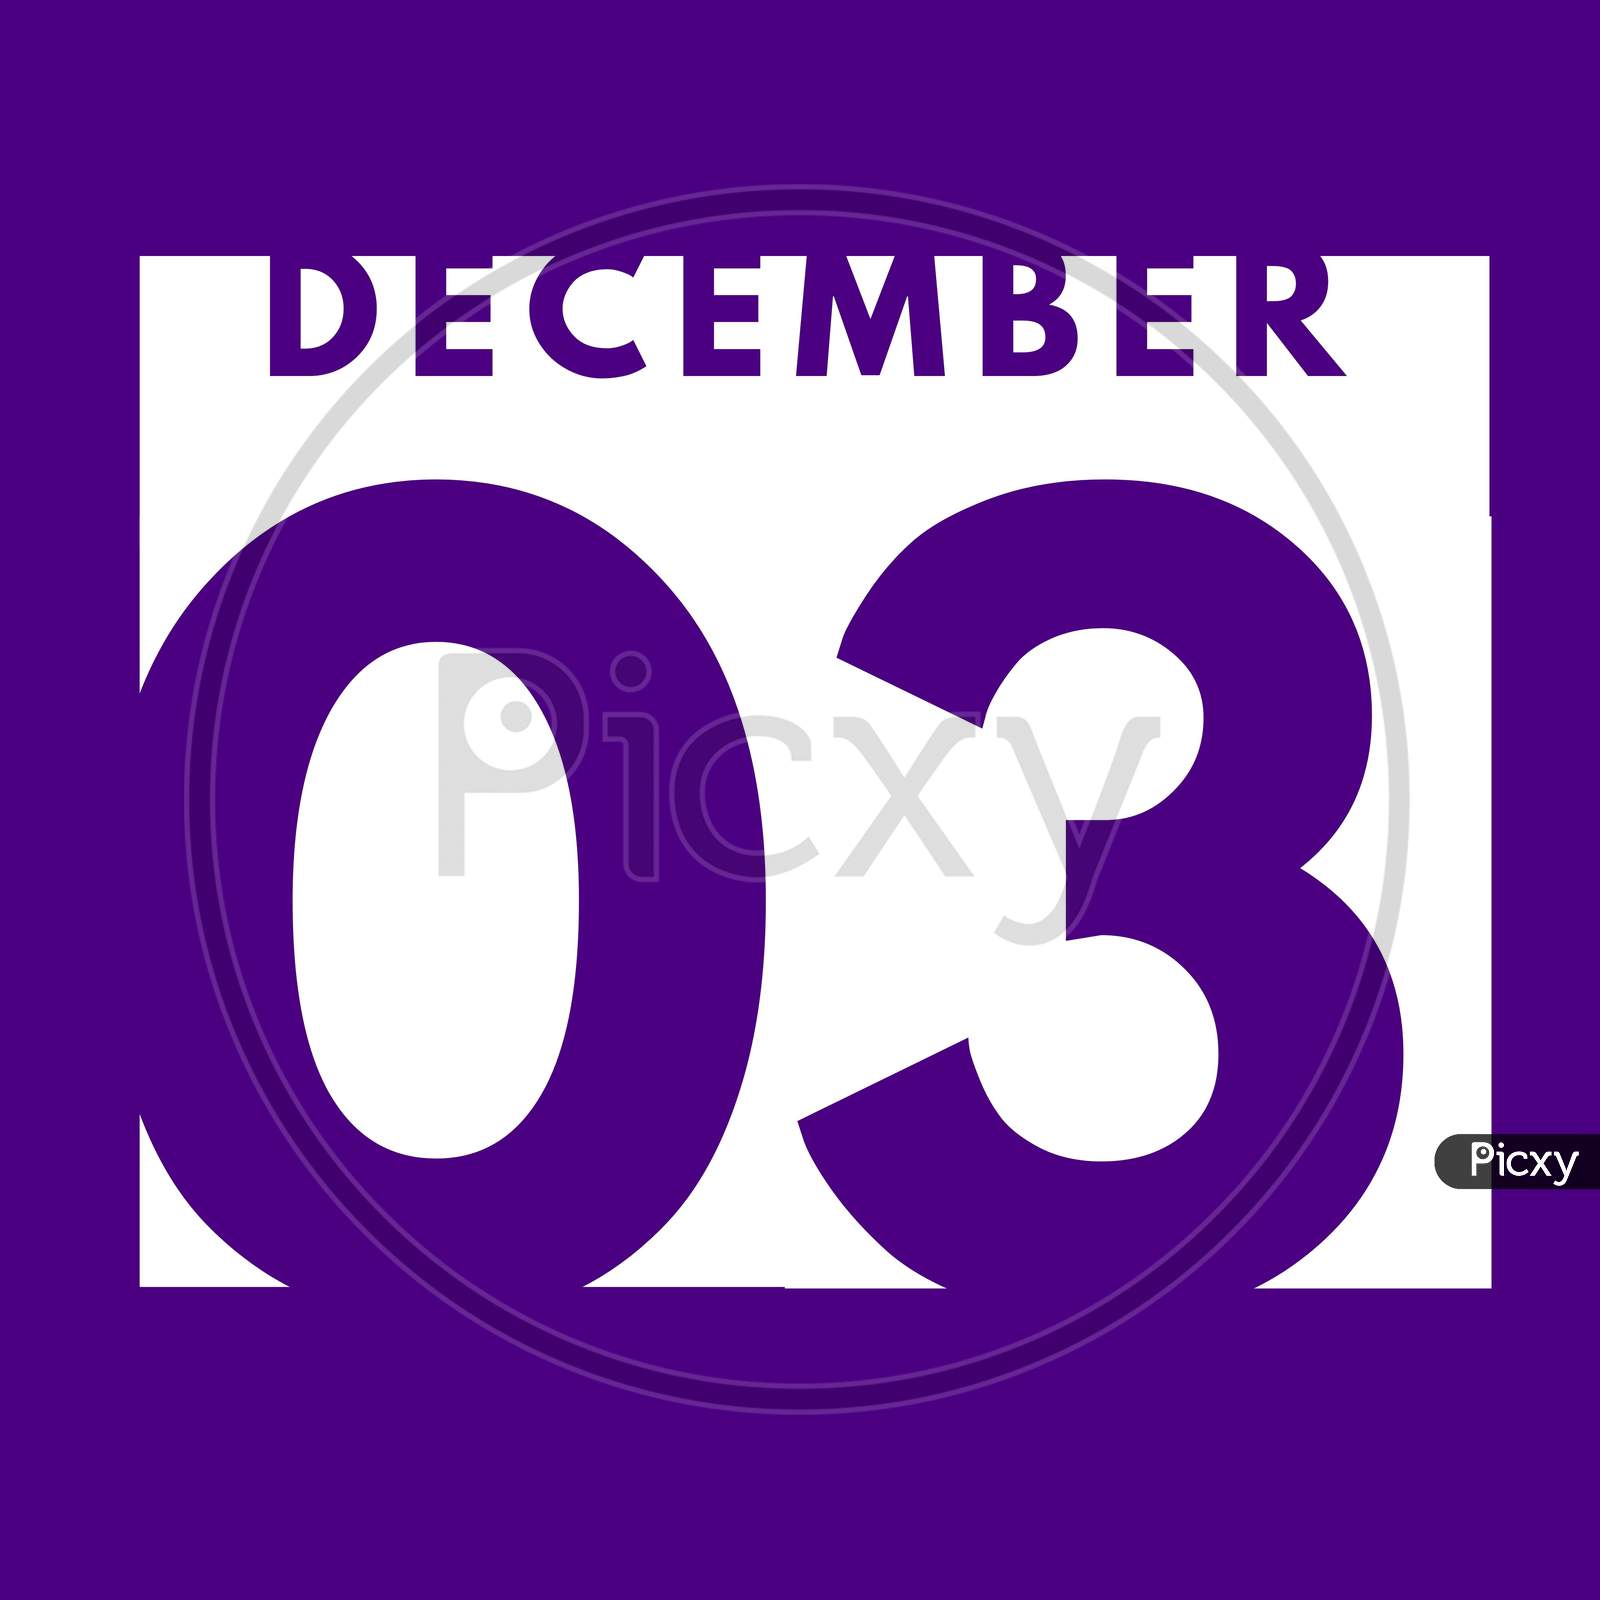 December 3 . Flat Modern Daily Calendar Icon .Date ,Day, Month .Calendar For The Month Of December